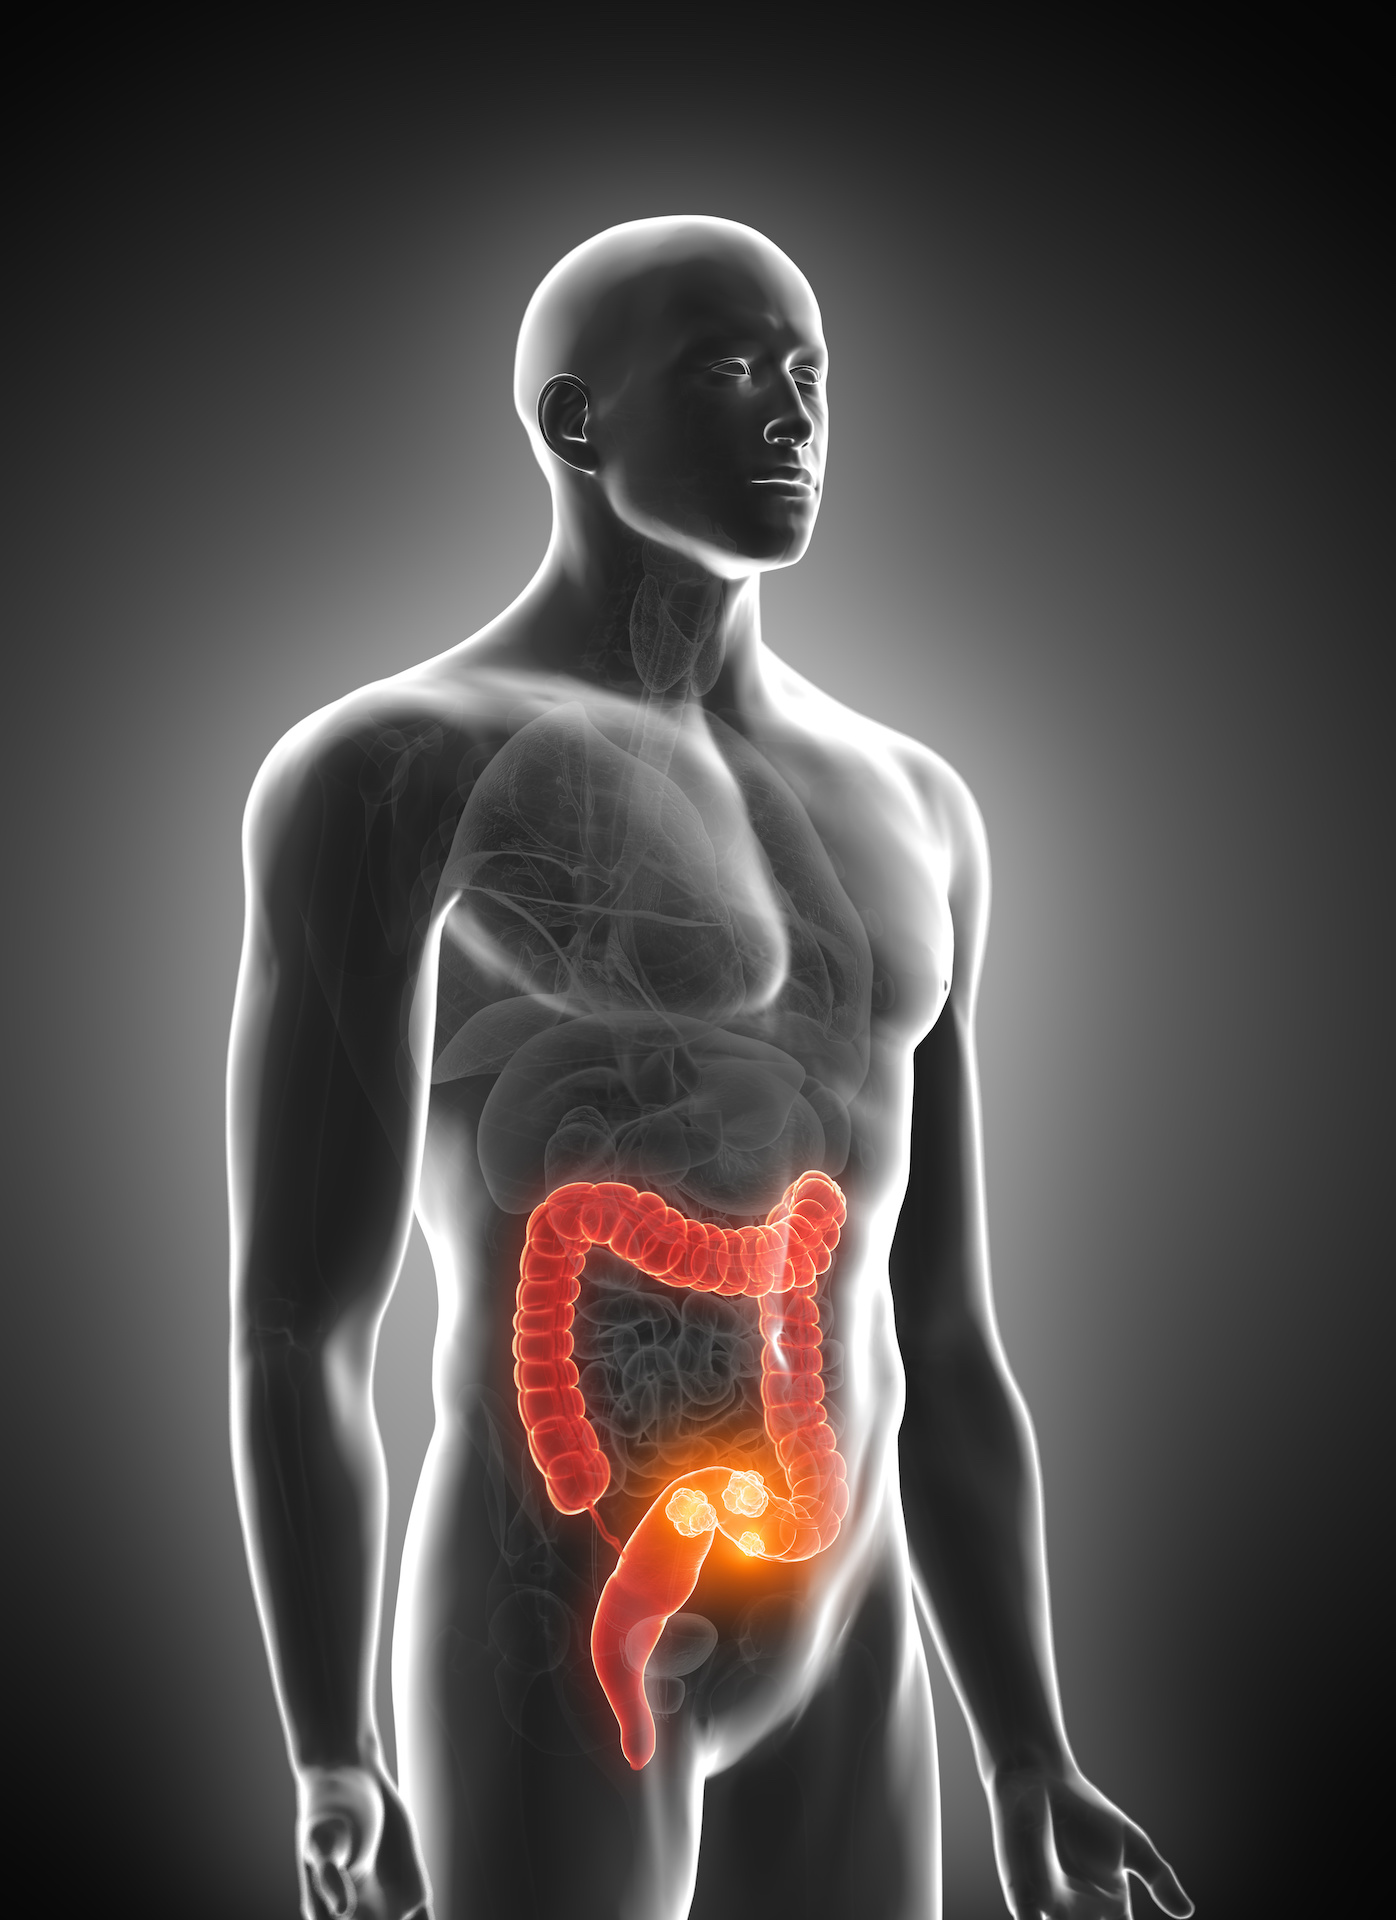 3d rendered medically accurate illustration of colorectal tumor